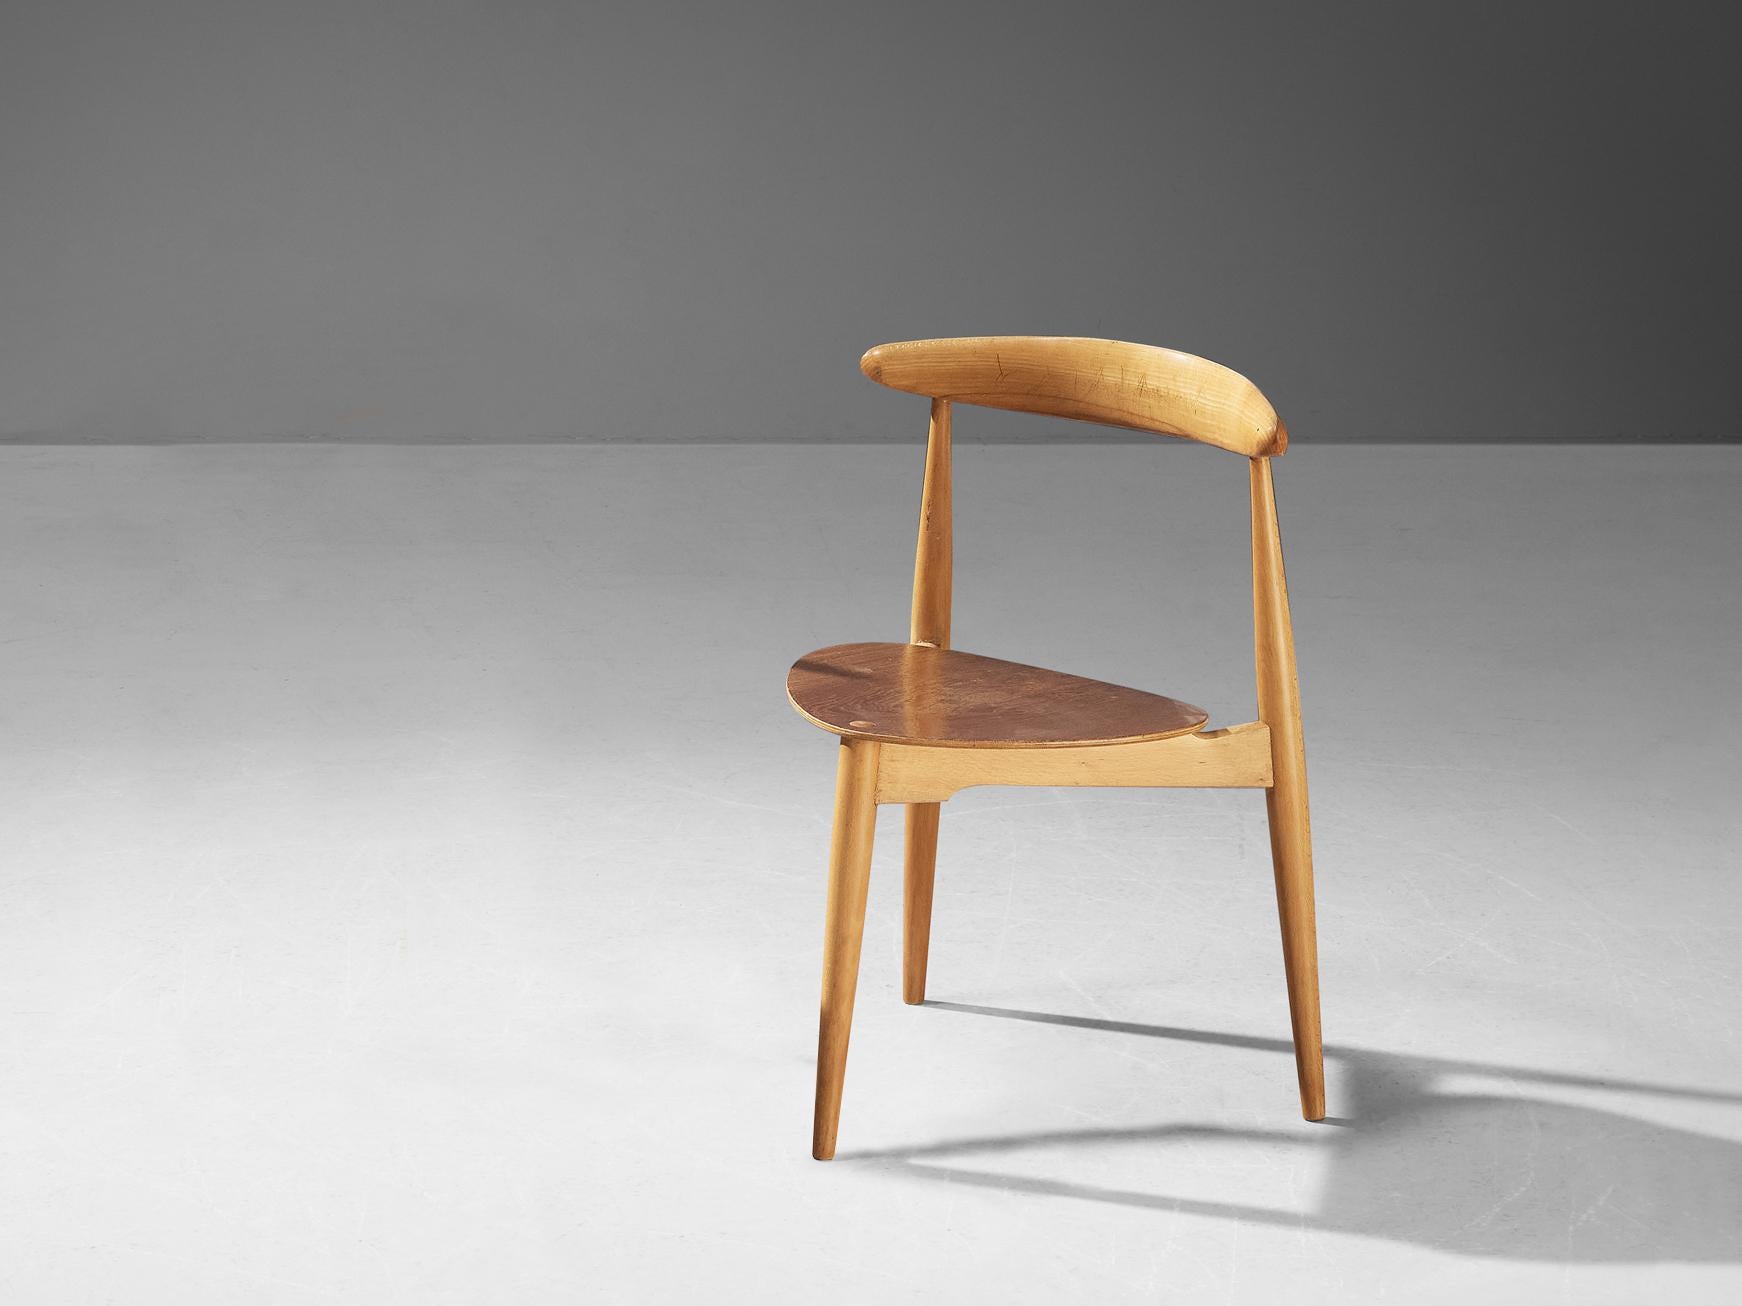 Hans Wegner for Fritz Hansen, ‘Heart’ dining chair model ‘4103’, teak, beech, Denmark, designed in 1953

Wonderful chair designed by Hans Wegner in 1953. The chair is designed to take up as little space as possible whilst at the same time having a